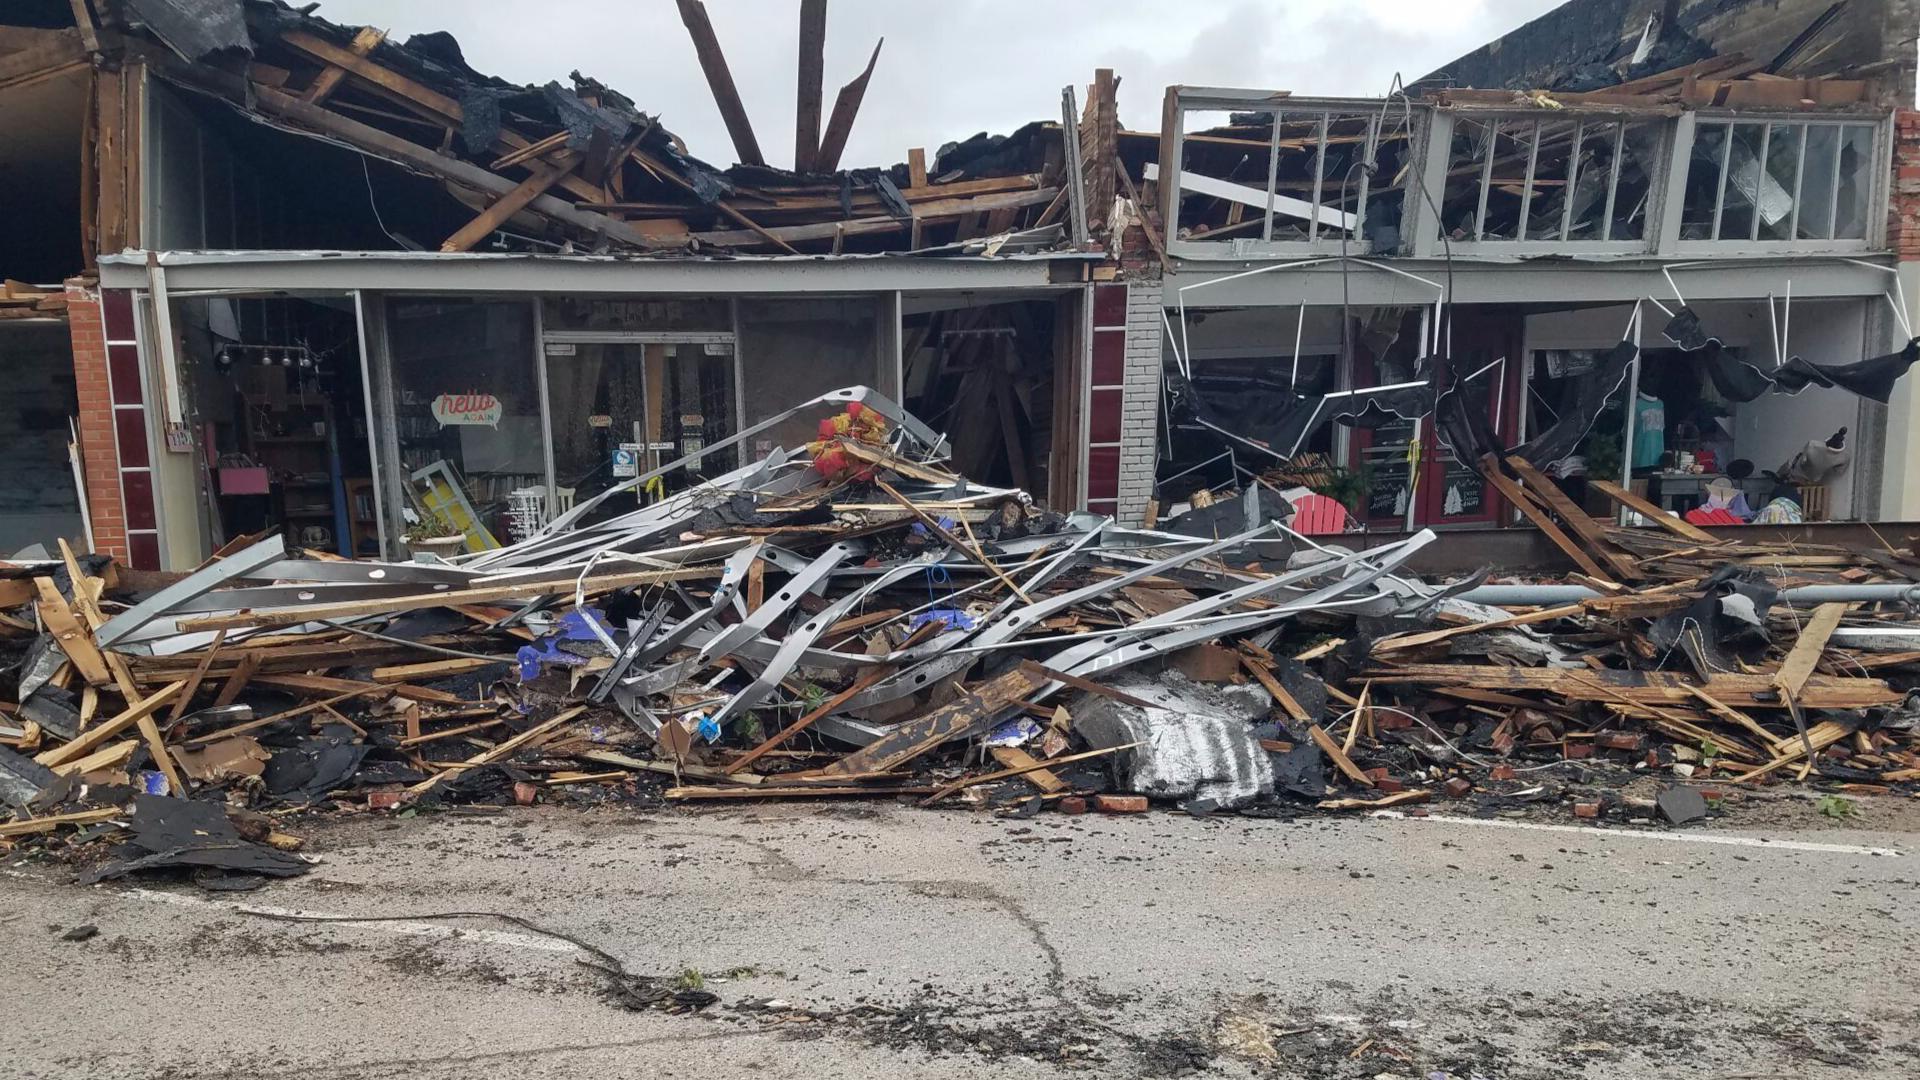 An infant is among the dead after the destructive outbreak of severe weather flattened buildings and injured 100 across the state on Sunday.